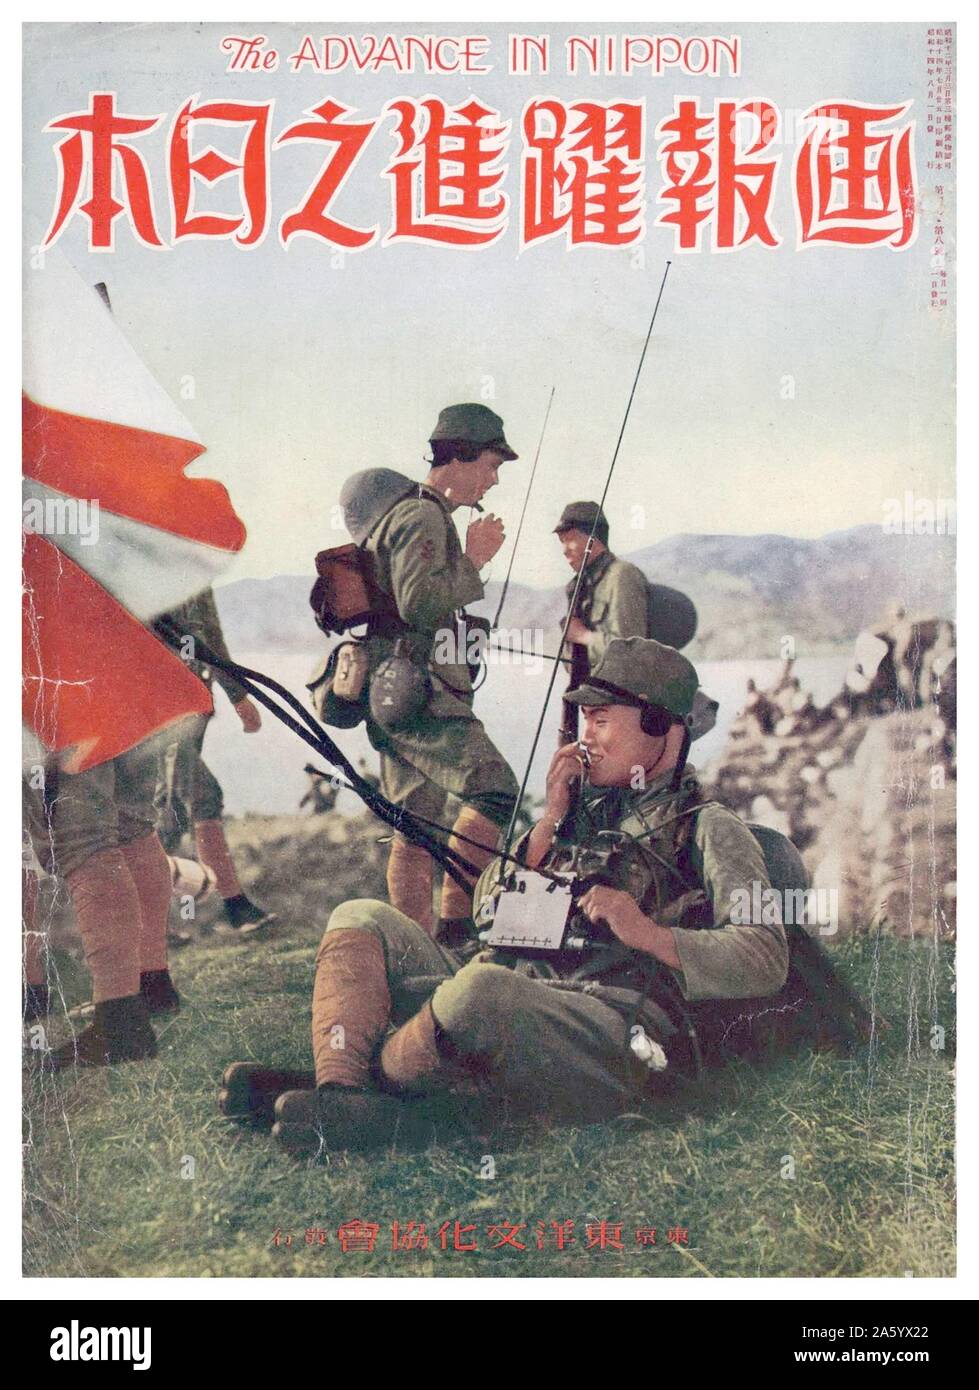 Leap of Japan Illustrated' cover, in June 1939, Shantou landing ashore after the Japanese invasion of China Corps Signal Corps. Stock Photo